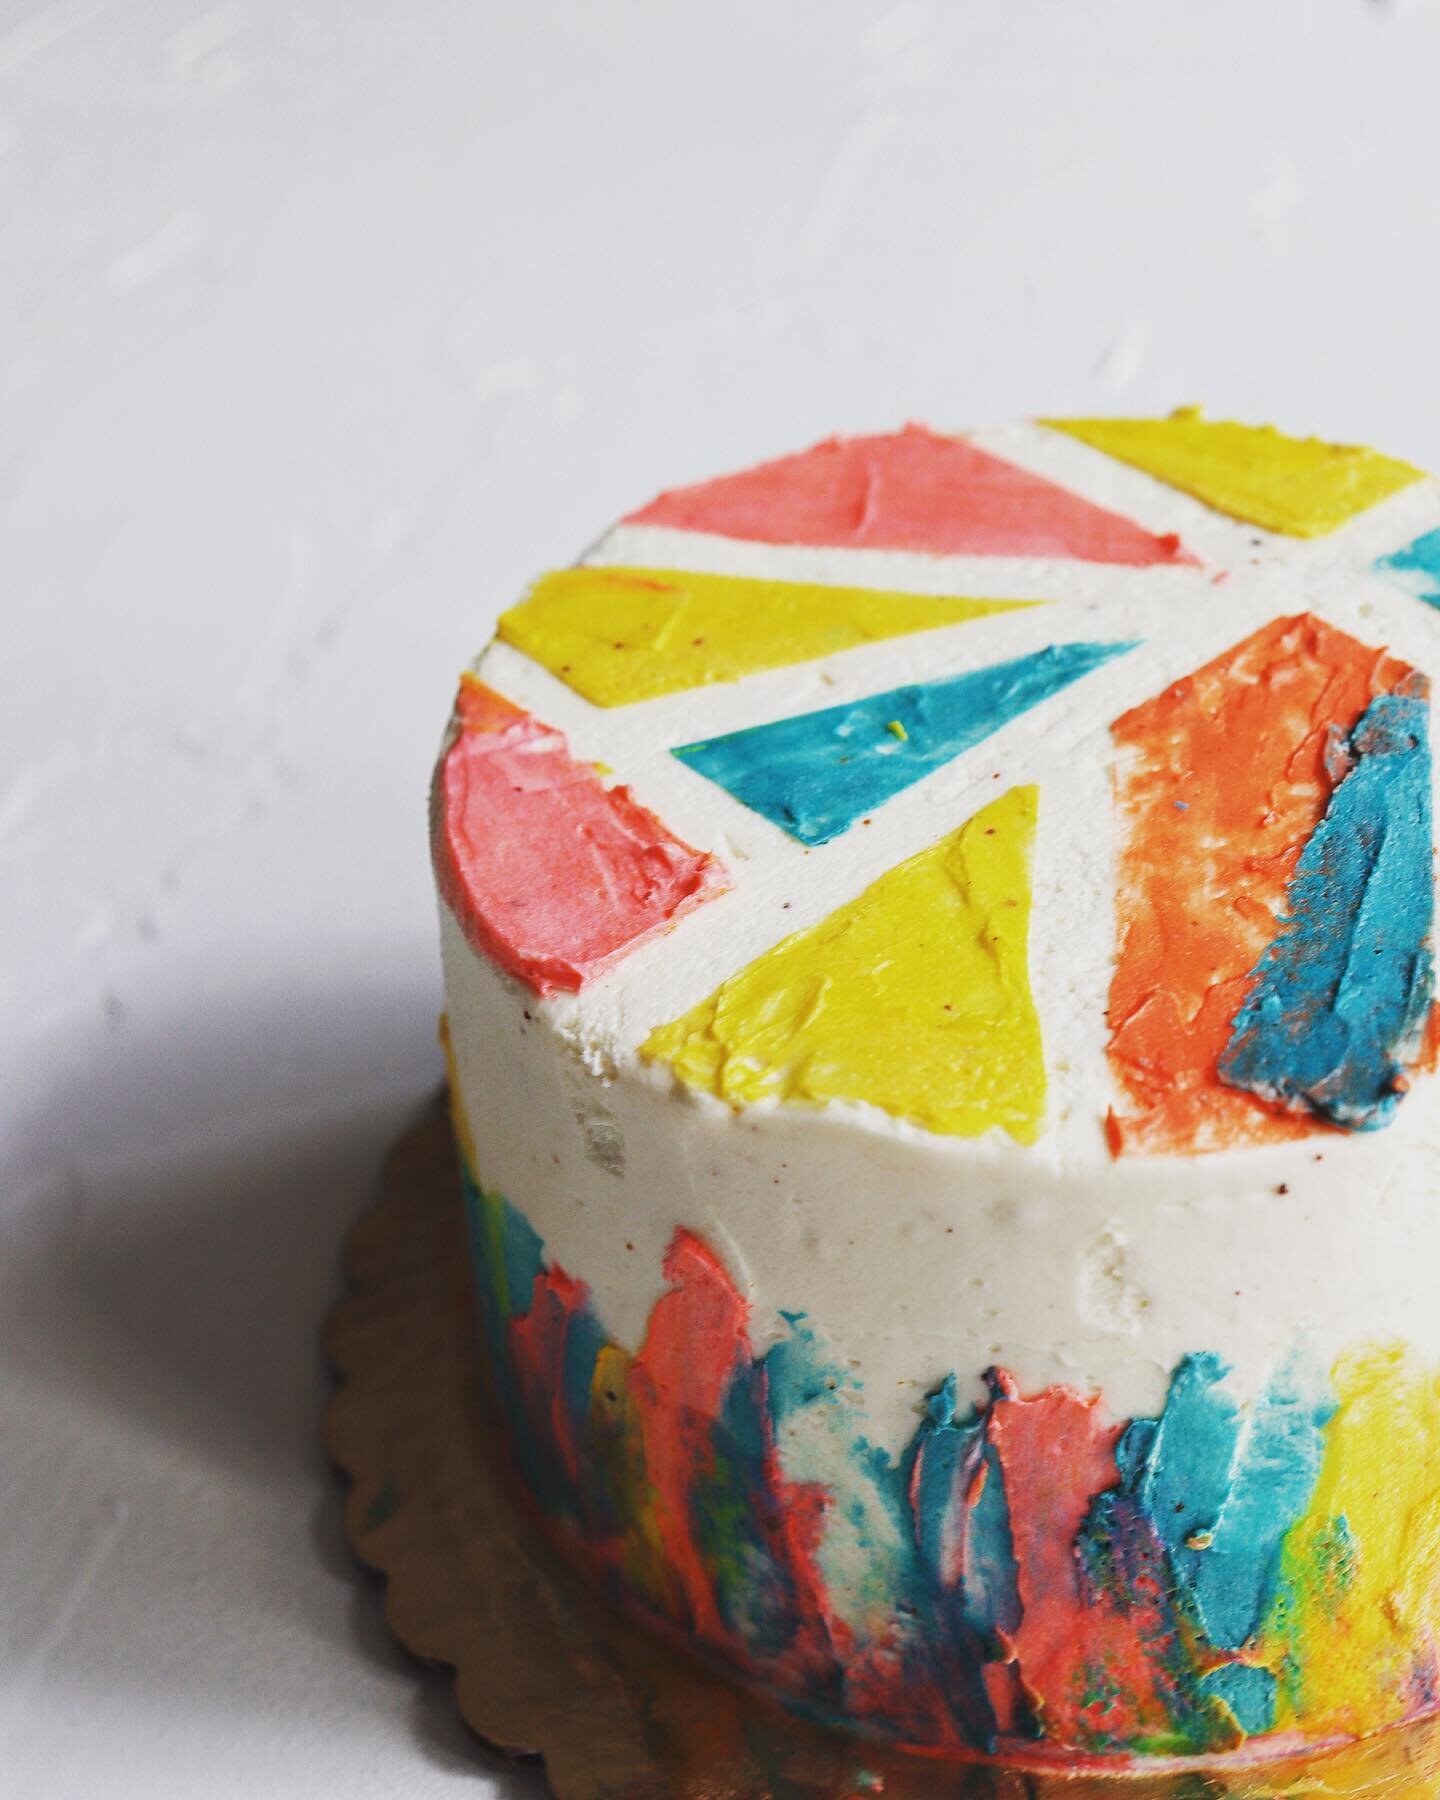 Let there be cake - but make it artfully inspired.